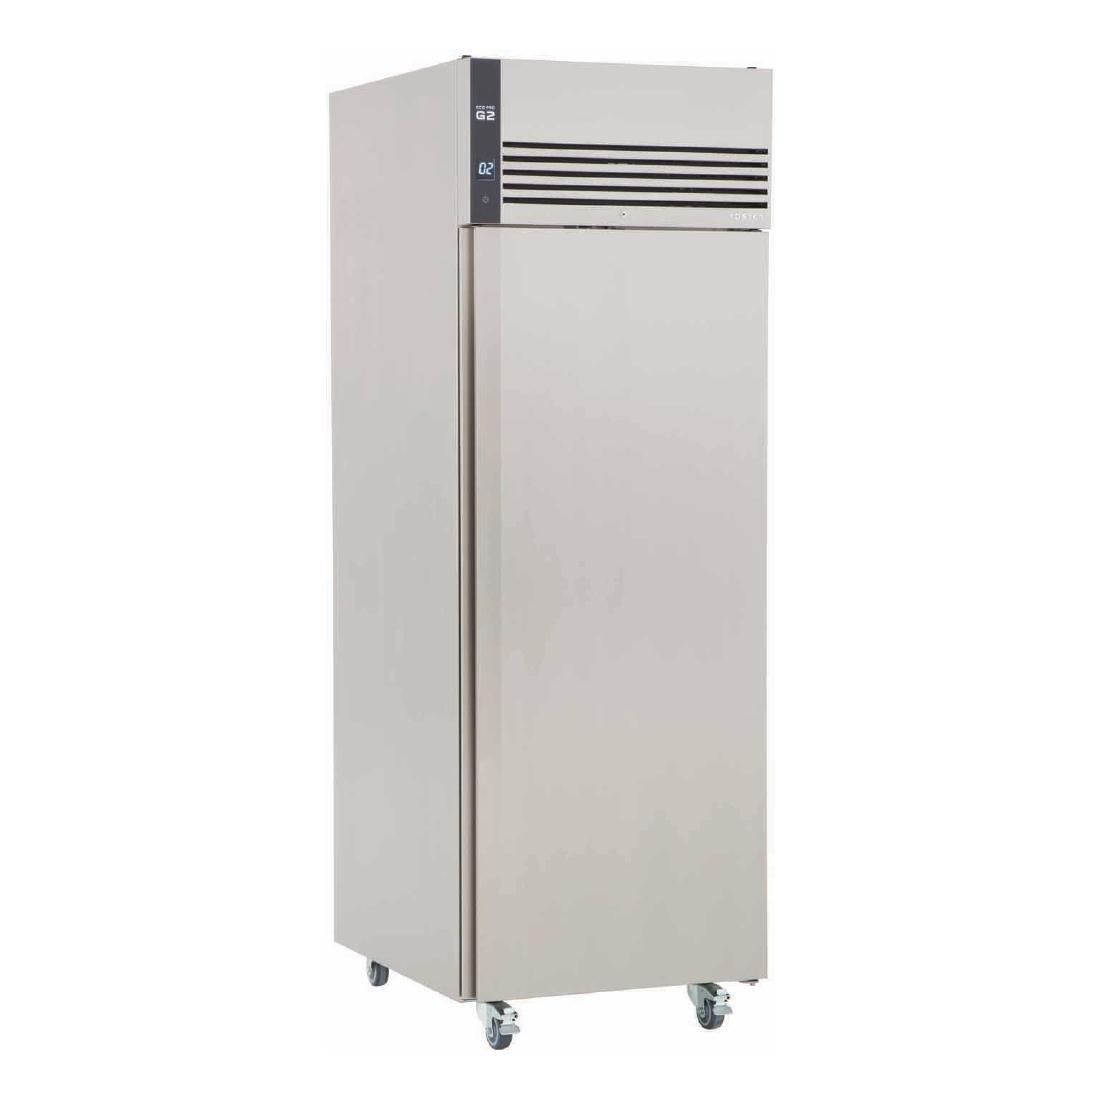 Foster EcoPro G2 1 Door 600Ltr Cabinet Freezer with Back EP700L 10/117